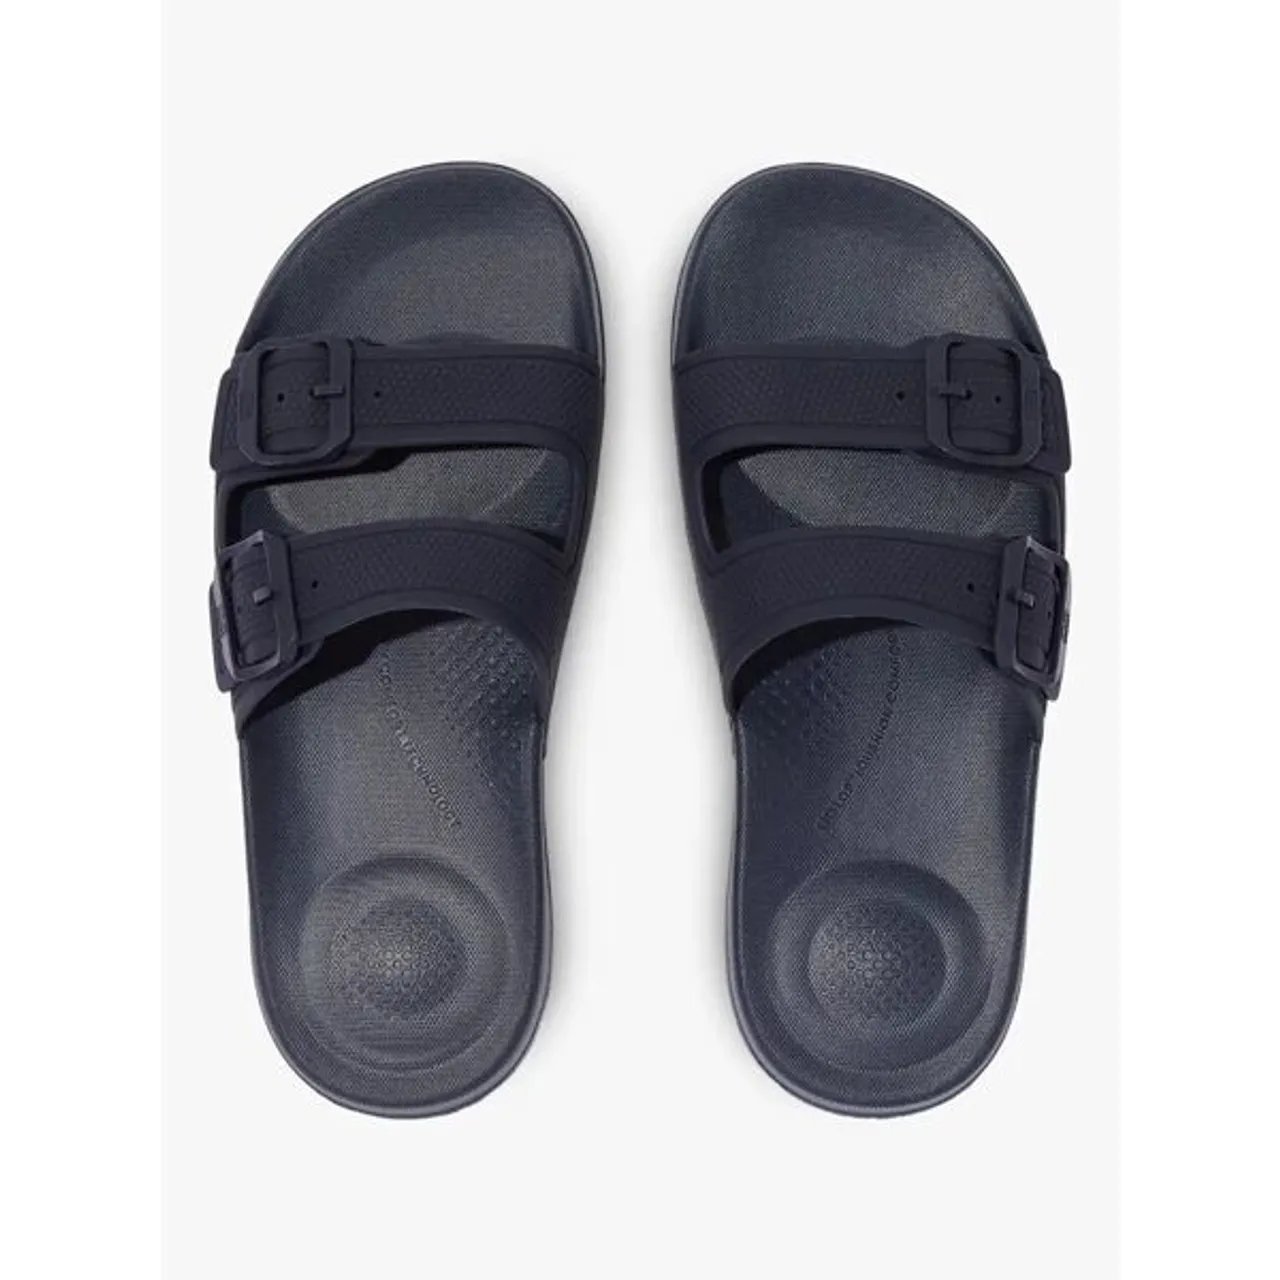 FitFlop IQushion Slider Sandals - Midnight Navy - Female